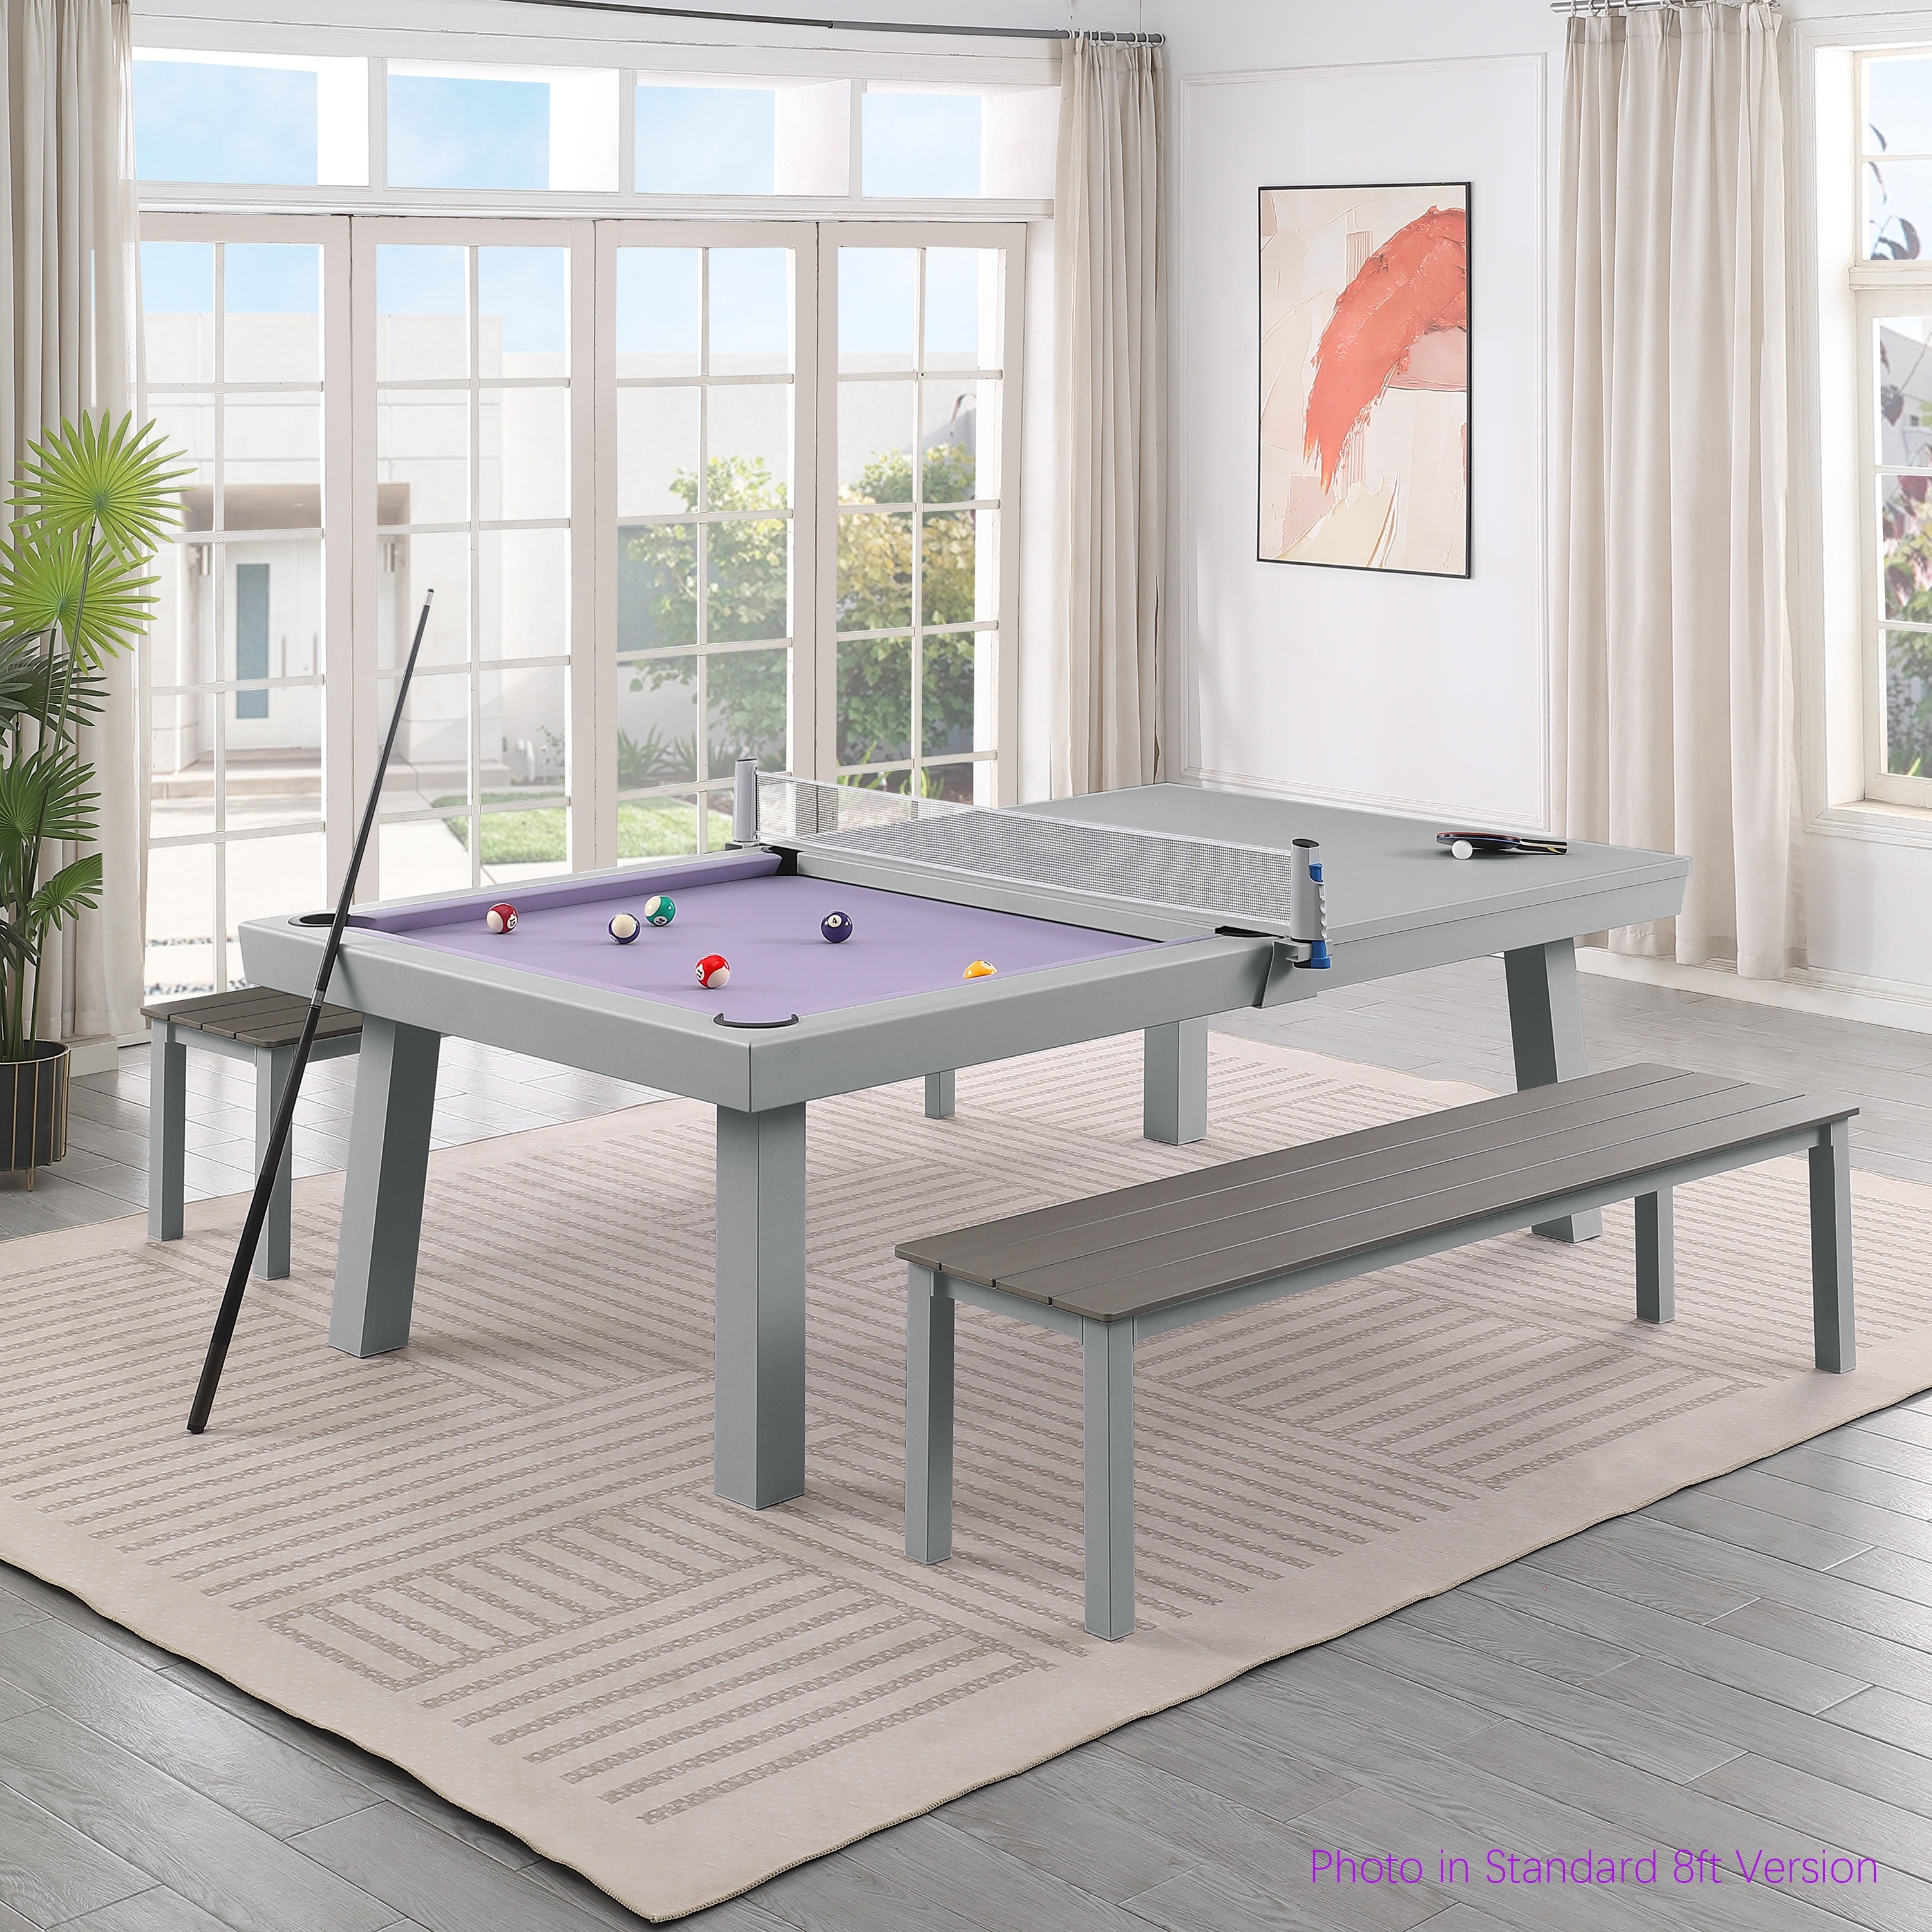 Newport Outdoor Patio 7ft Slate Pool Table Dining Set With 2 Benches and Accessories  Cement Finish